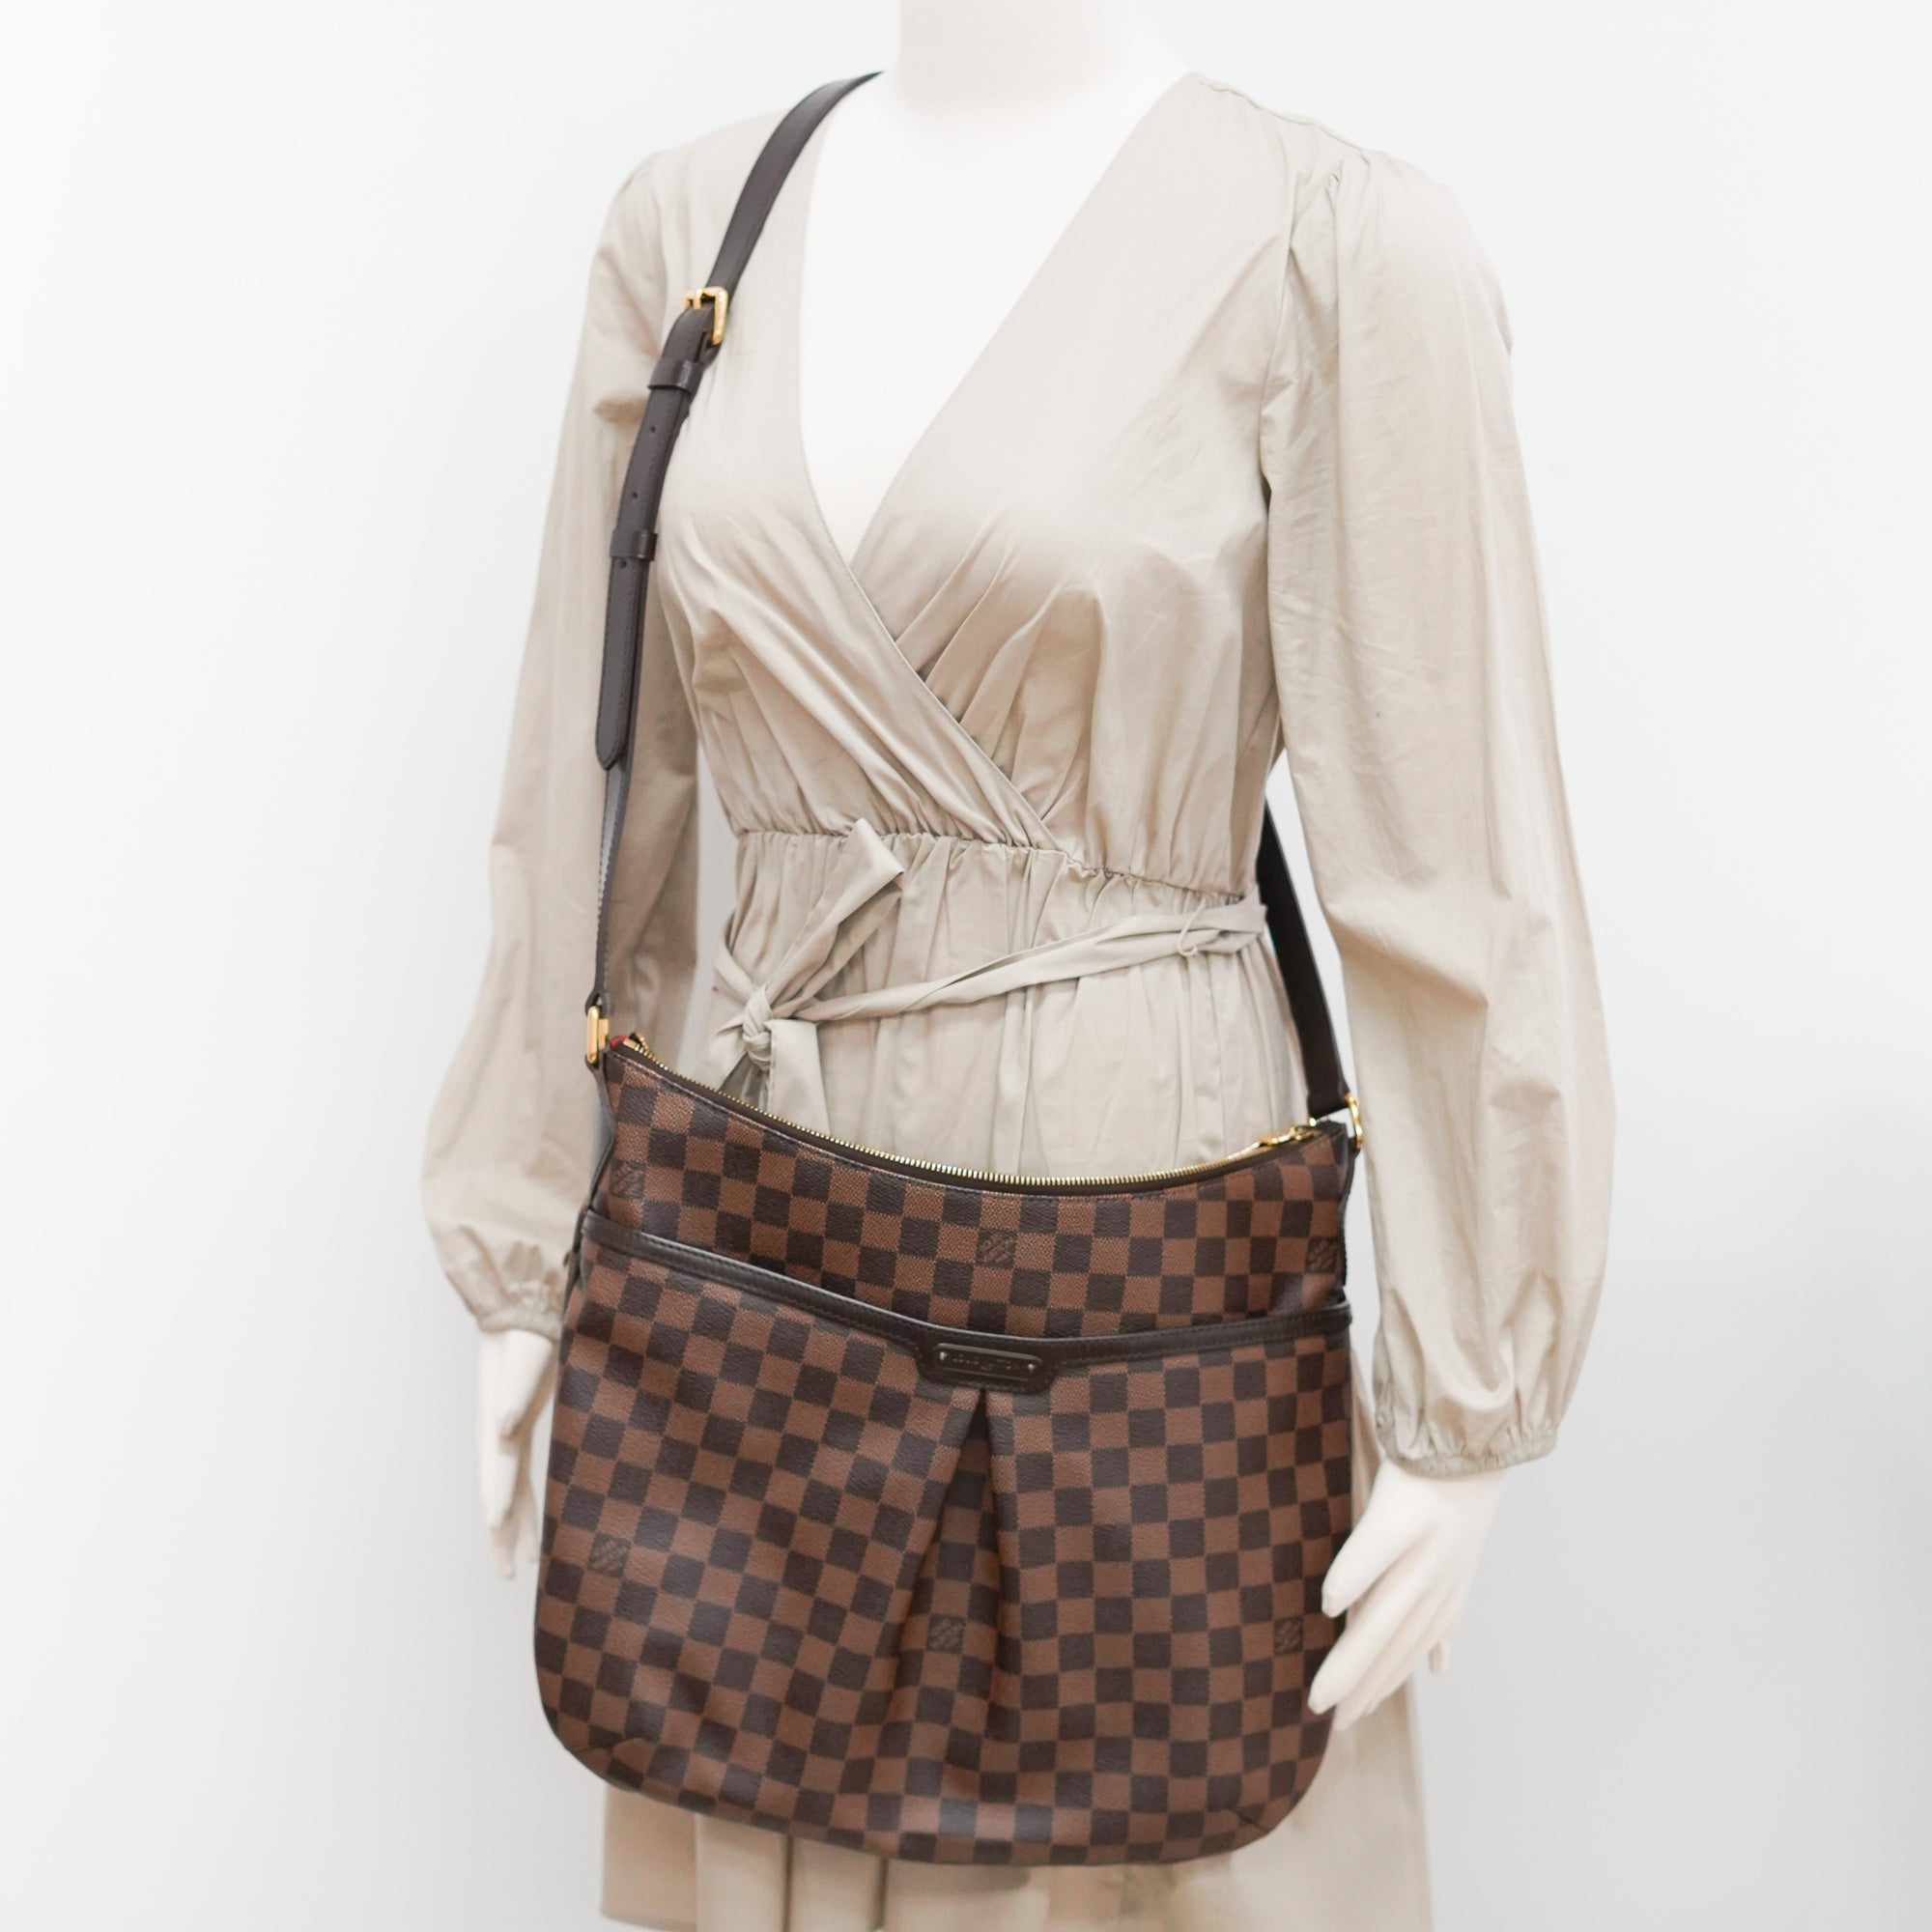 Louis Vuitton Damier Ebene Bloomsbury PM at Jill's Consignment